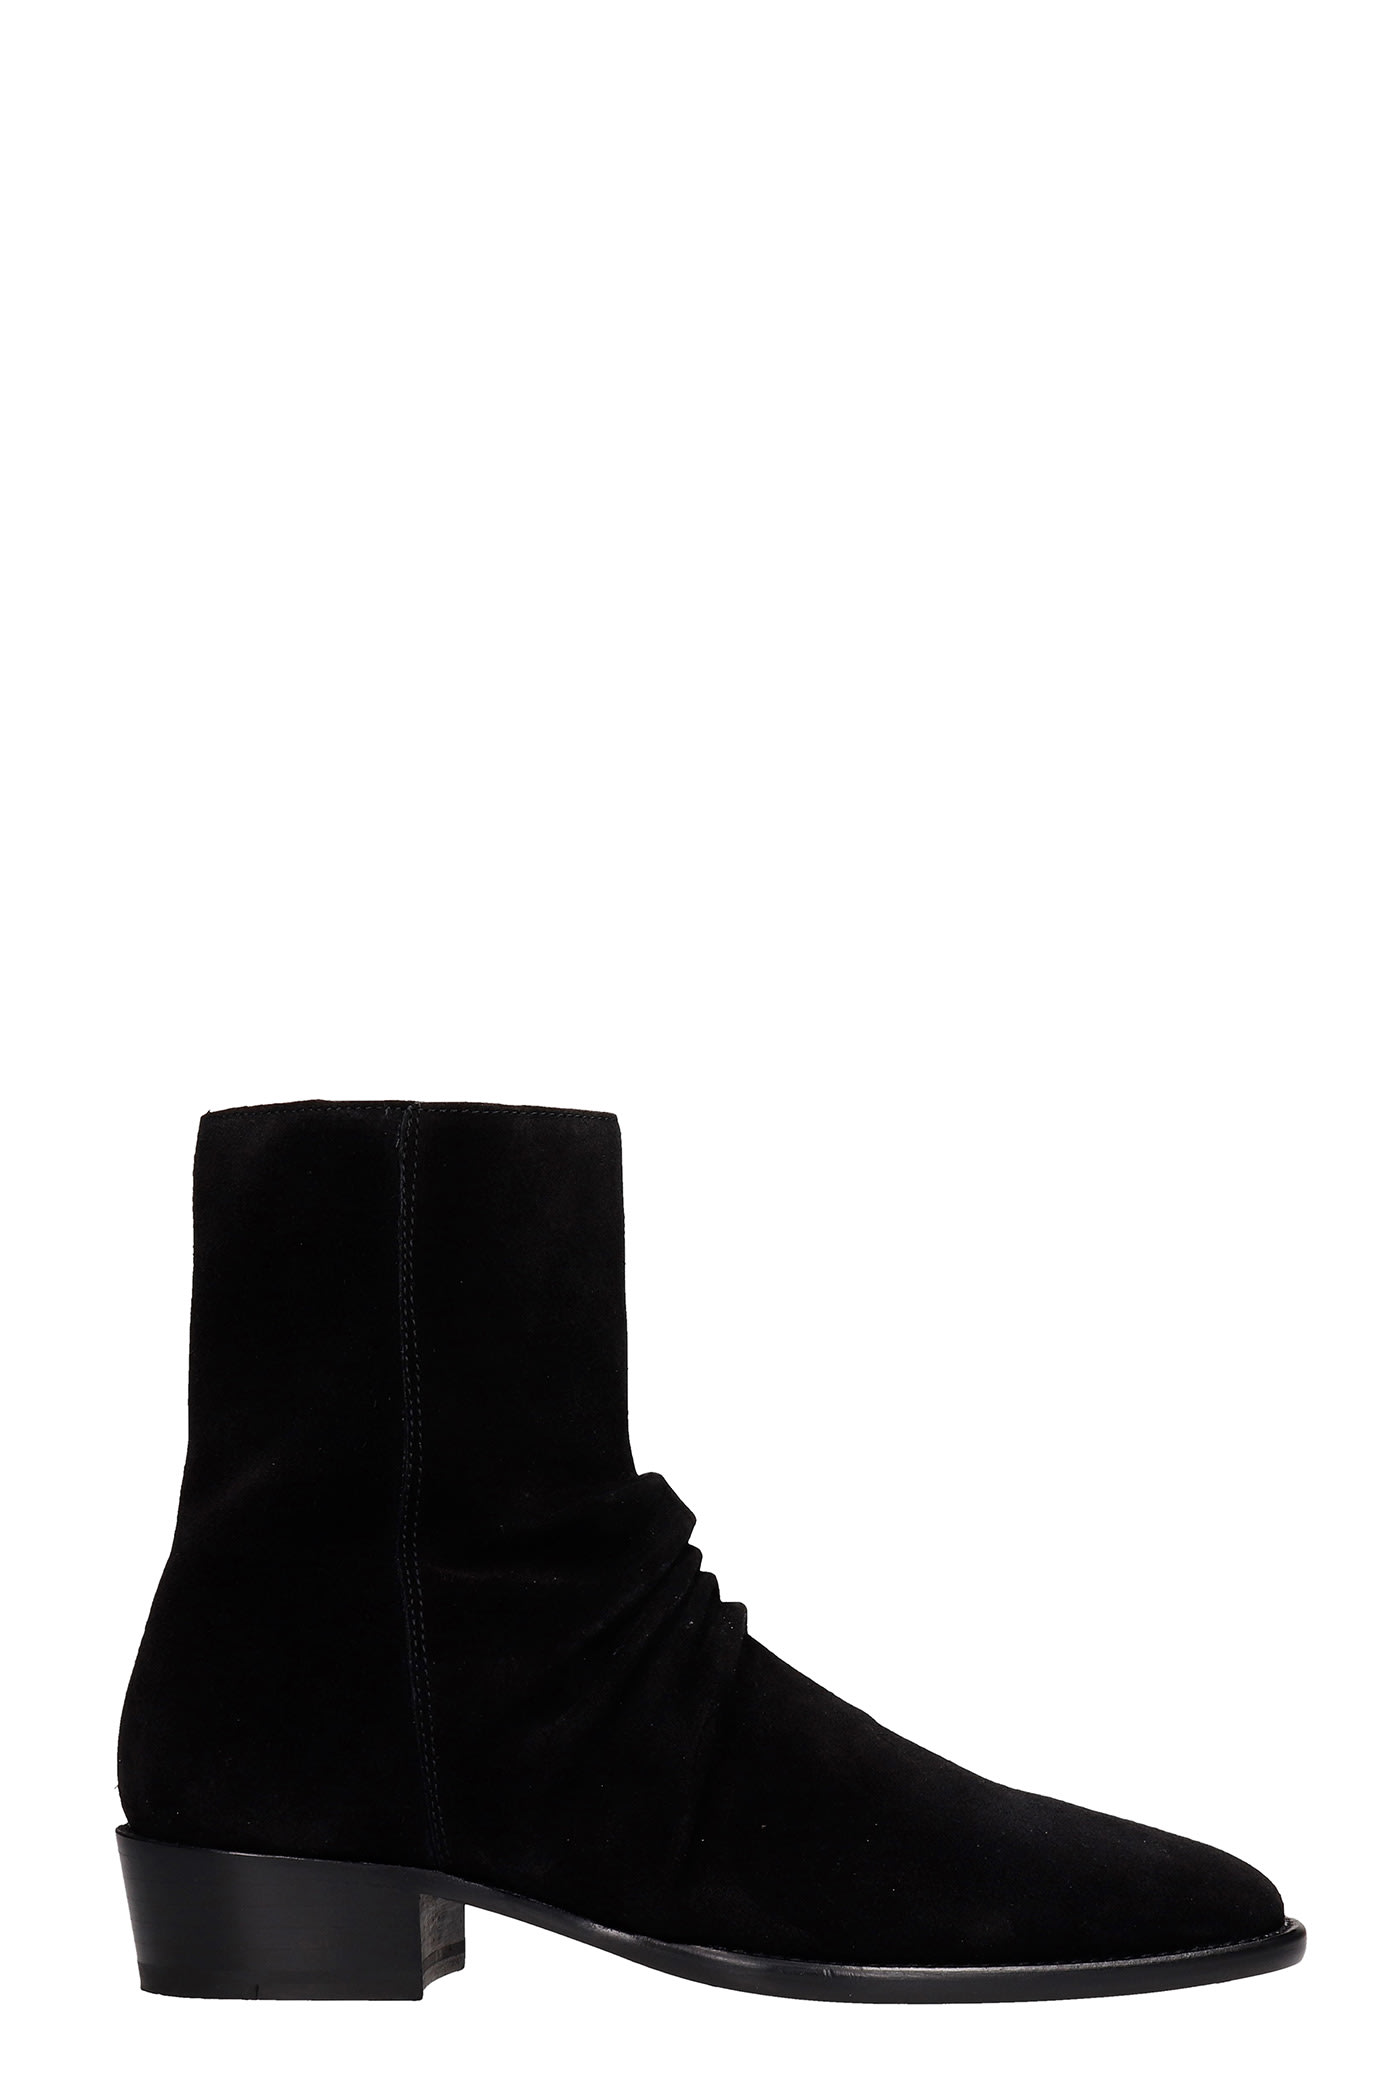 Amiri ANKLE BOOTS IN BLACK SUEDE